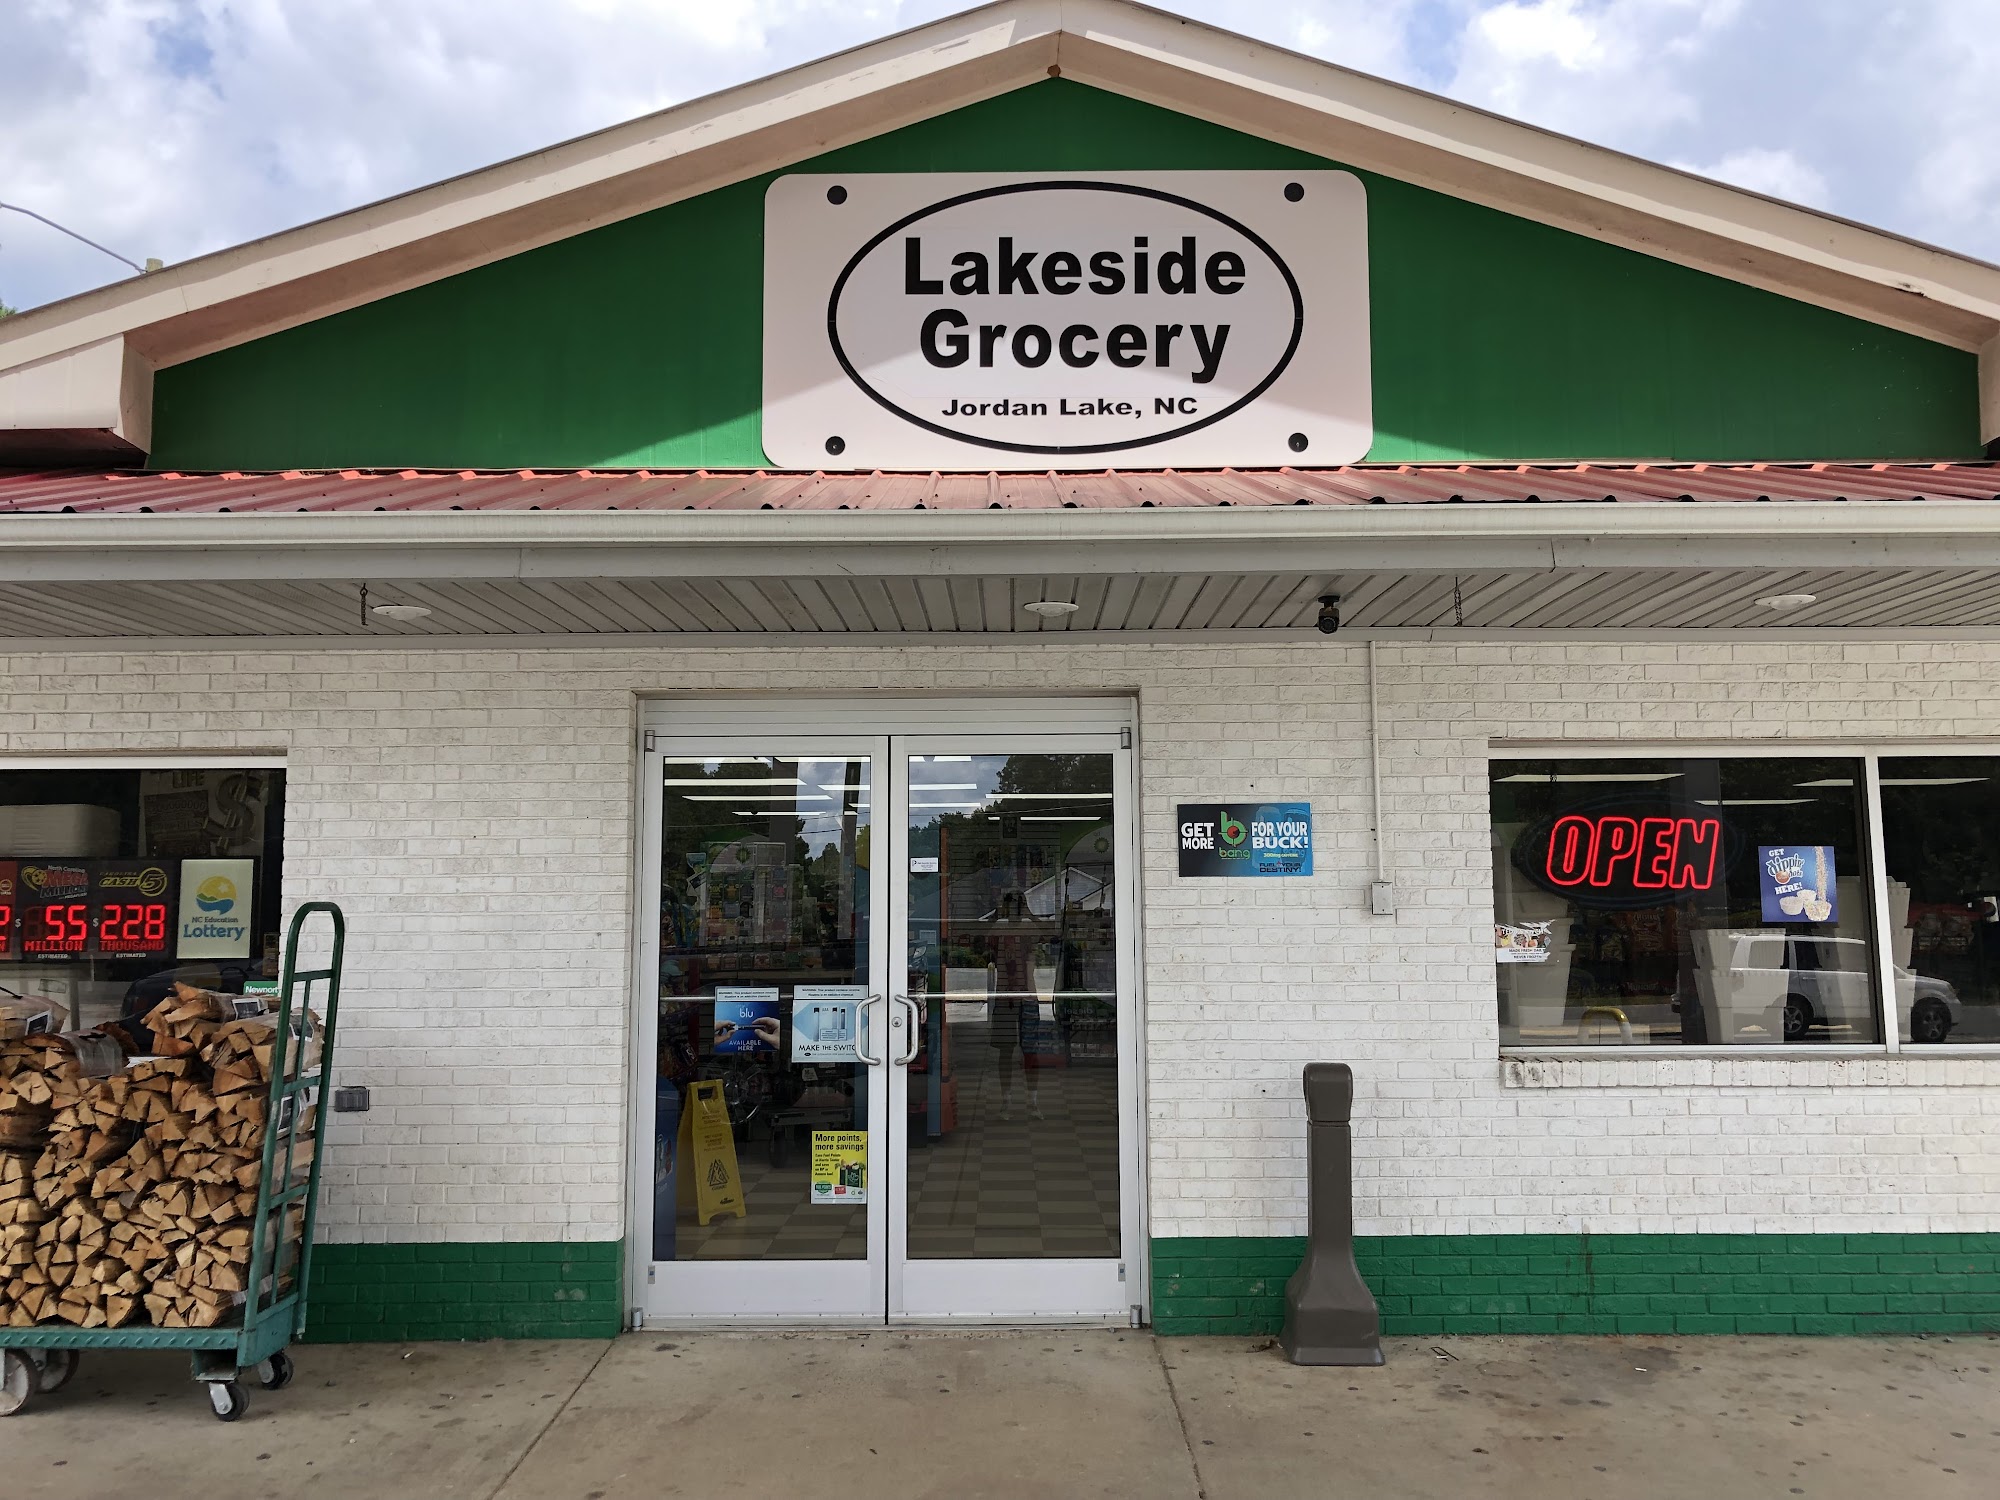 Lakeside Grocery